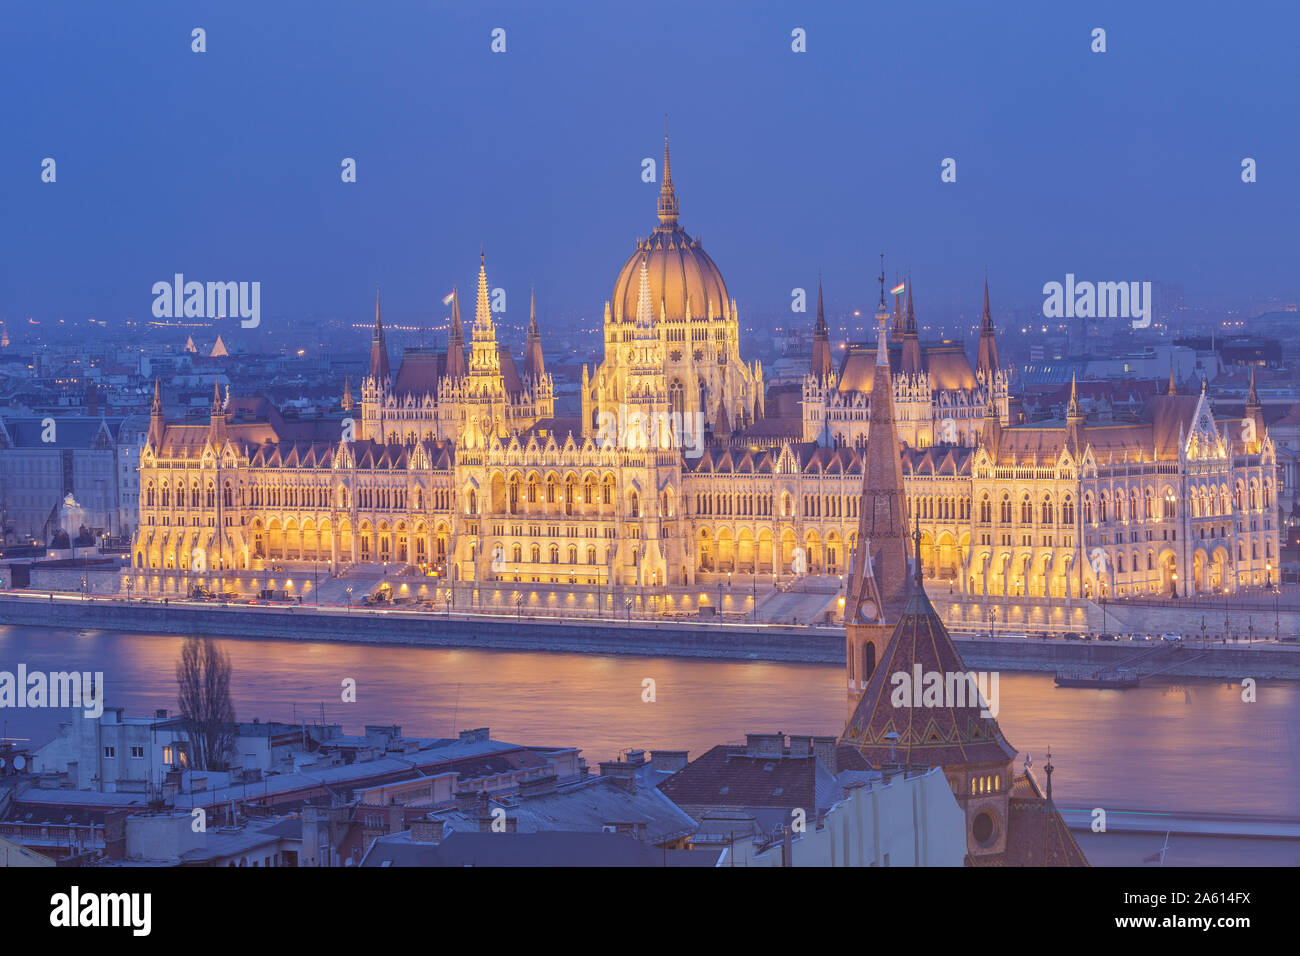 Sitting on the banks of the River Danube, the Hungarian Parliament Building built in Gothic Revival style, UNESCO, Budapest, Hungary Stock Photo